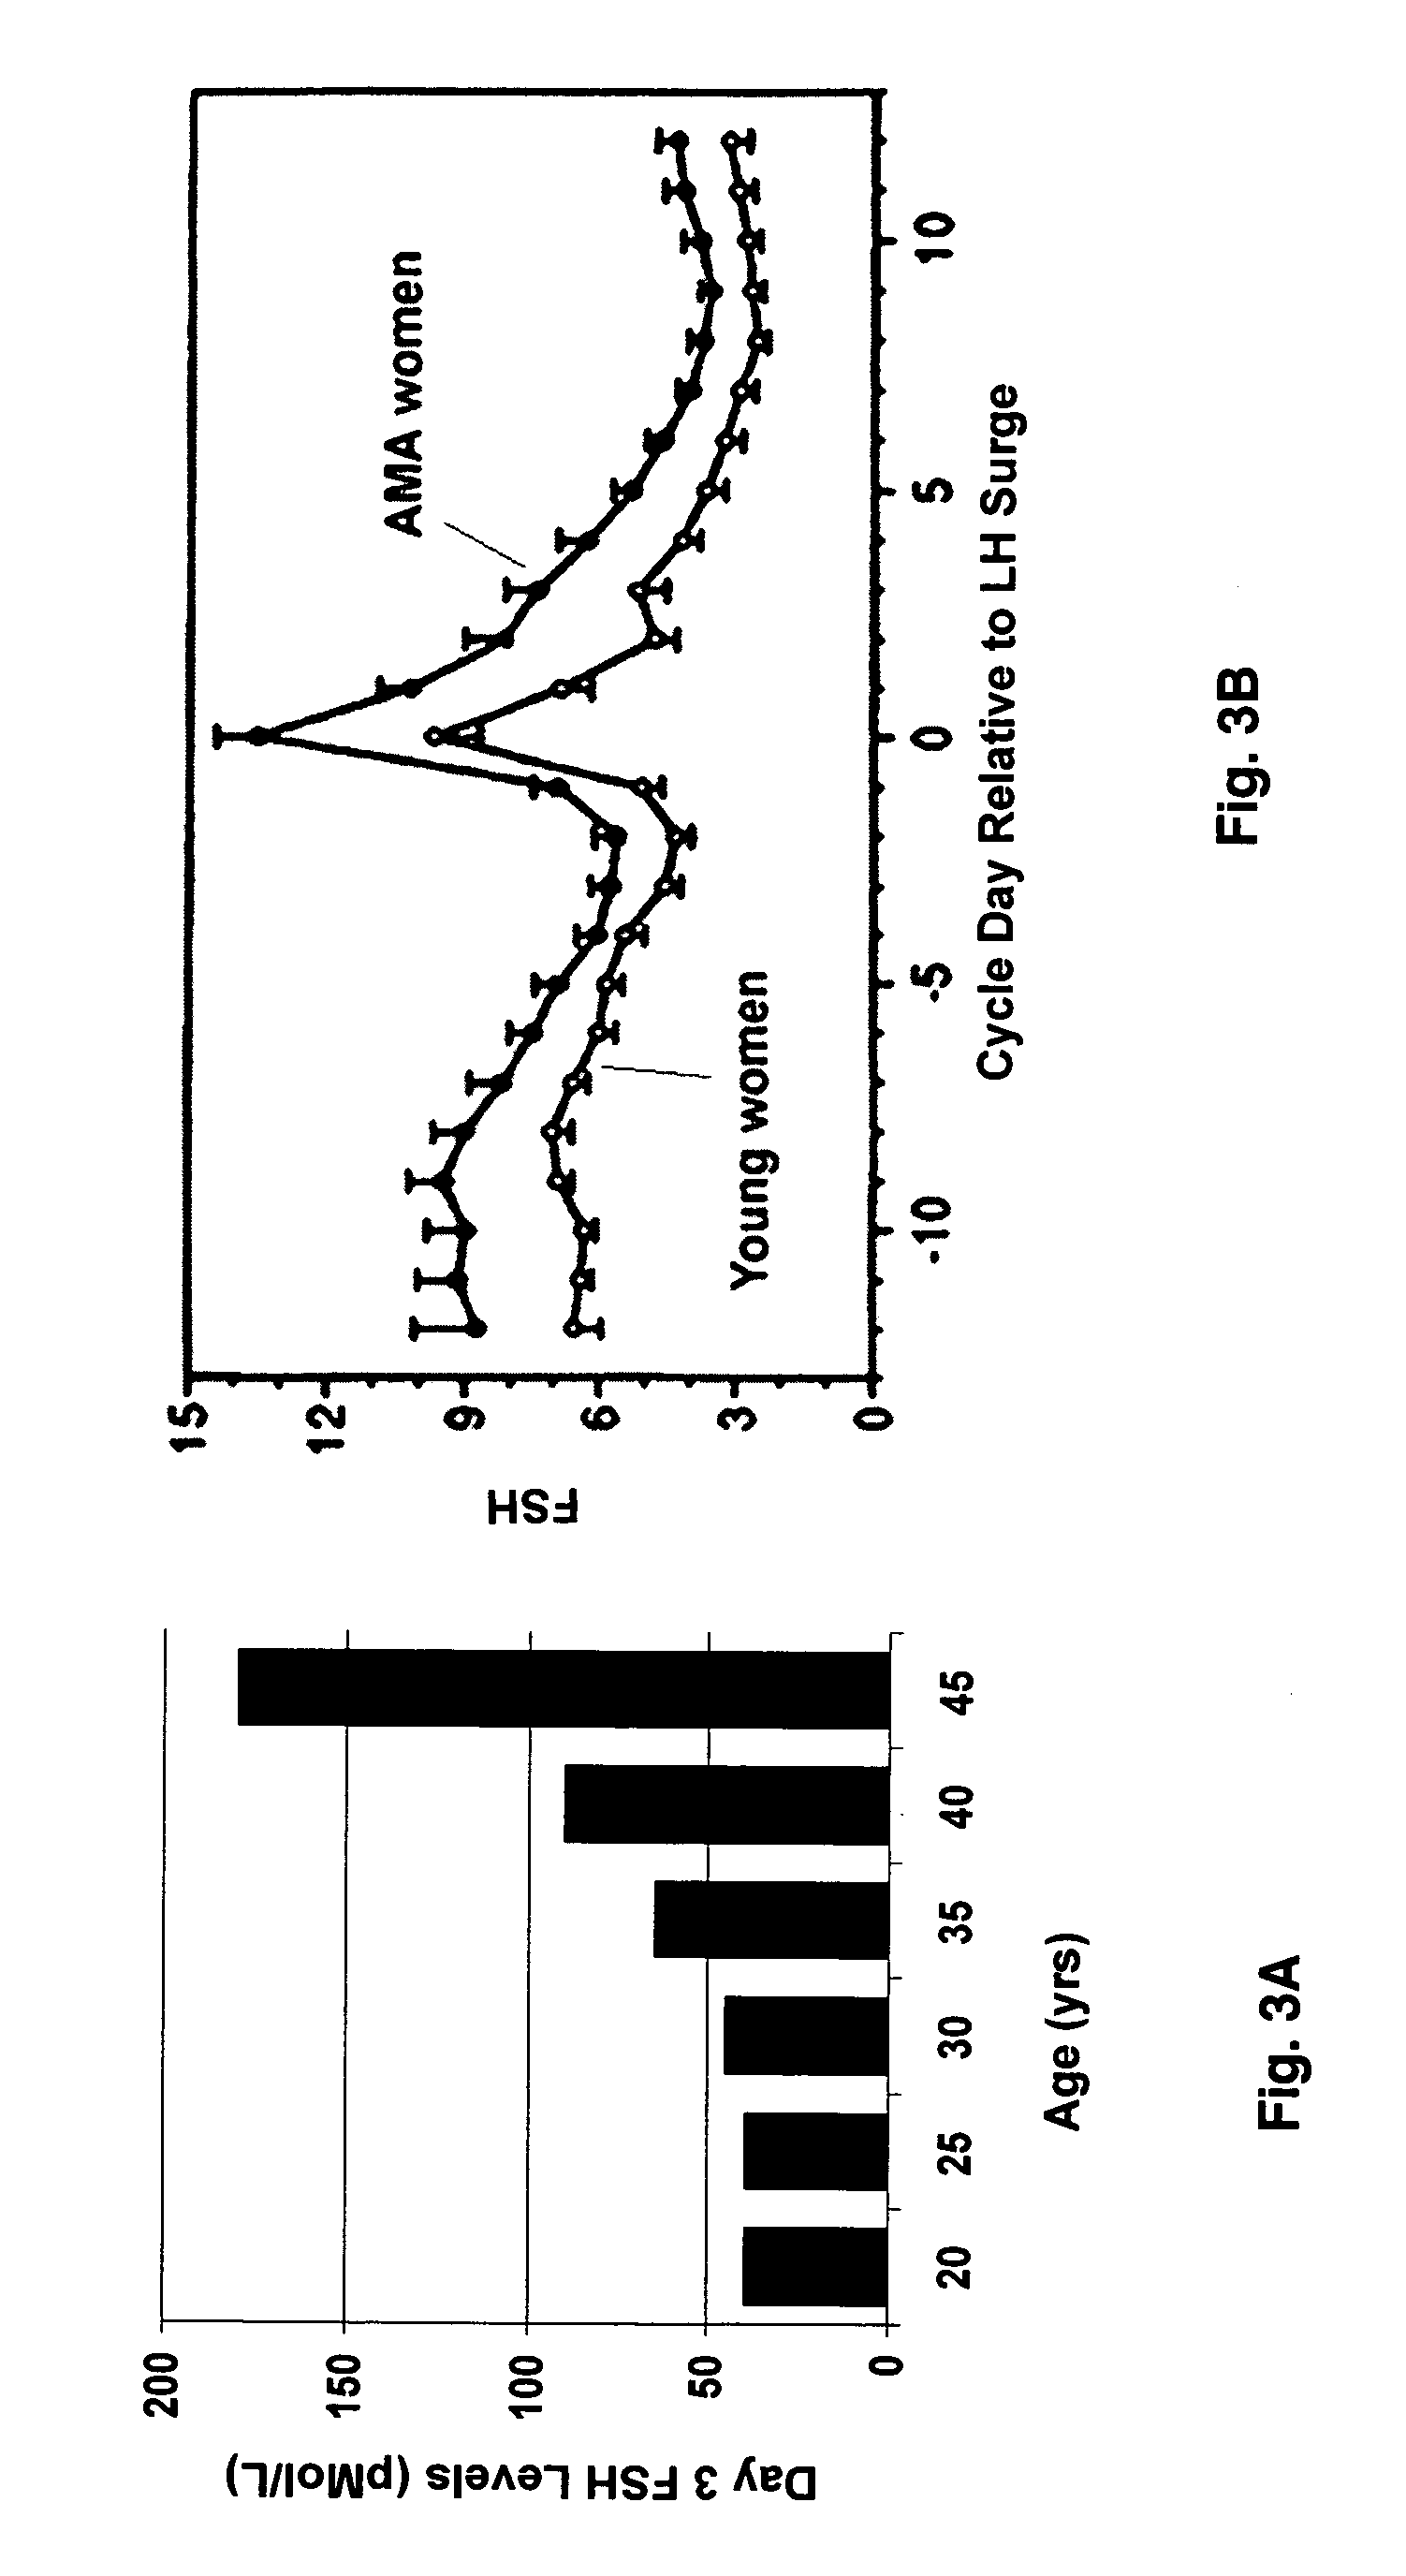 Hormone normalization therapy and uses therefor